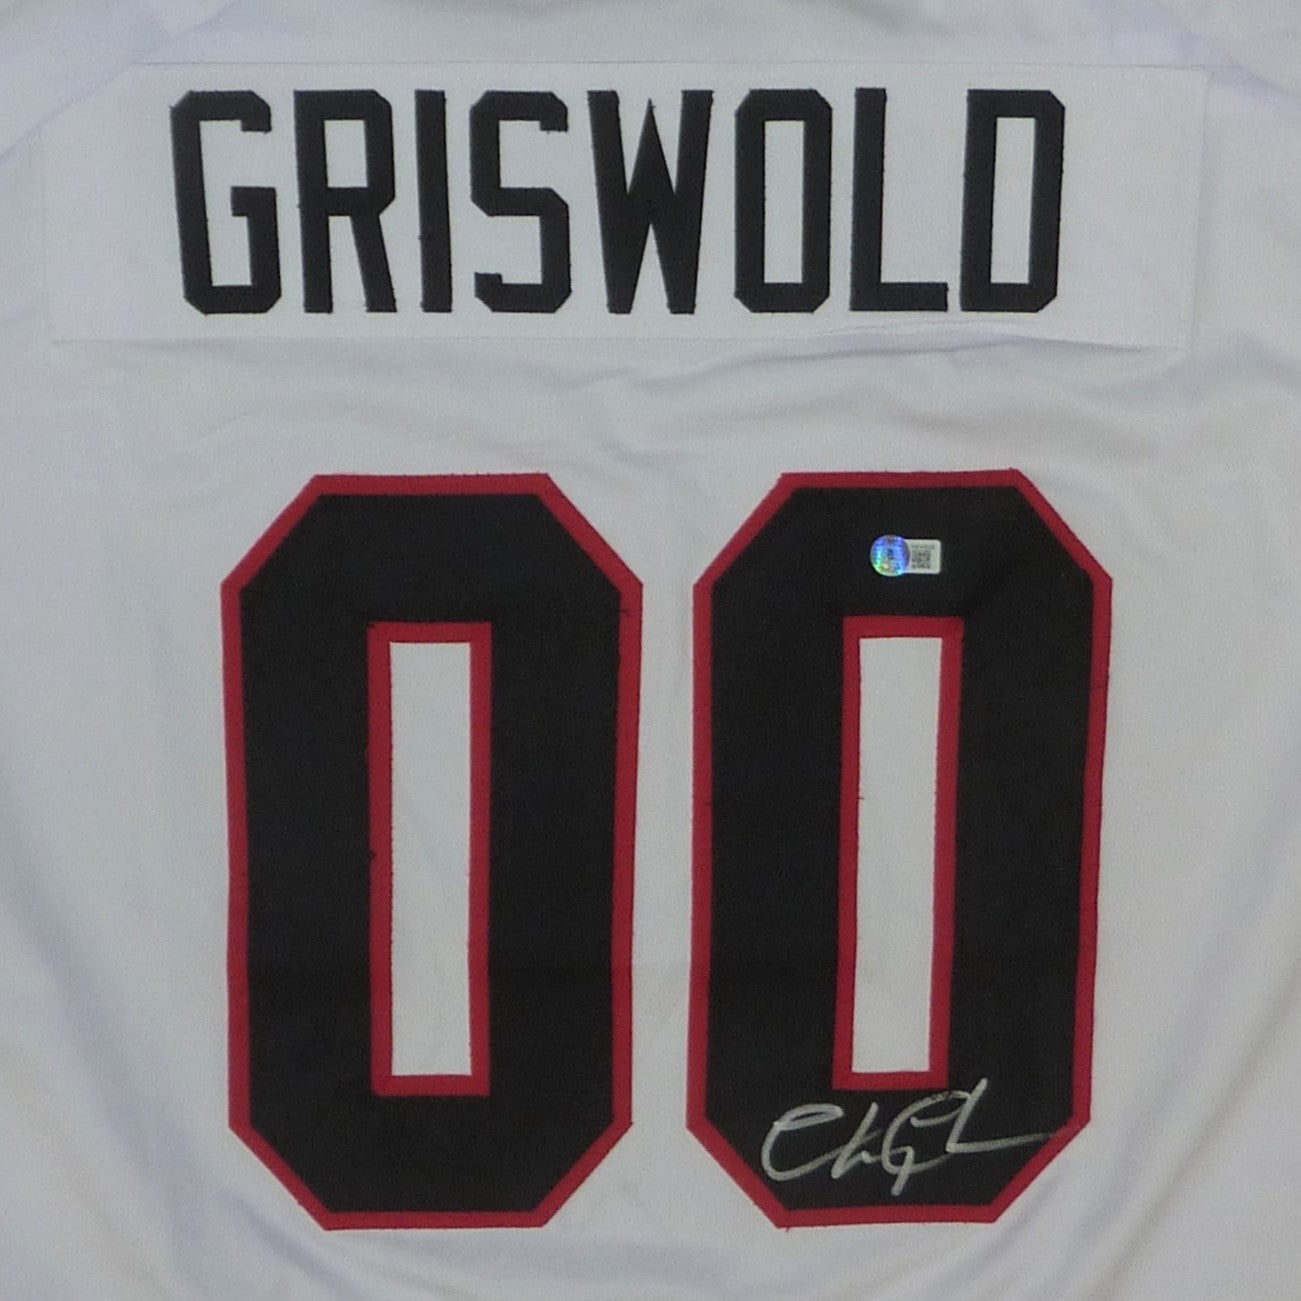 Chevy Chase Autographed National Lampoon's Christmas Vacation Clark  Griswold Hockey Jersey